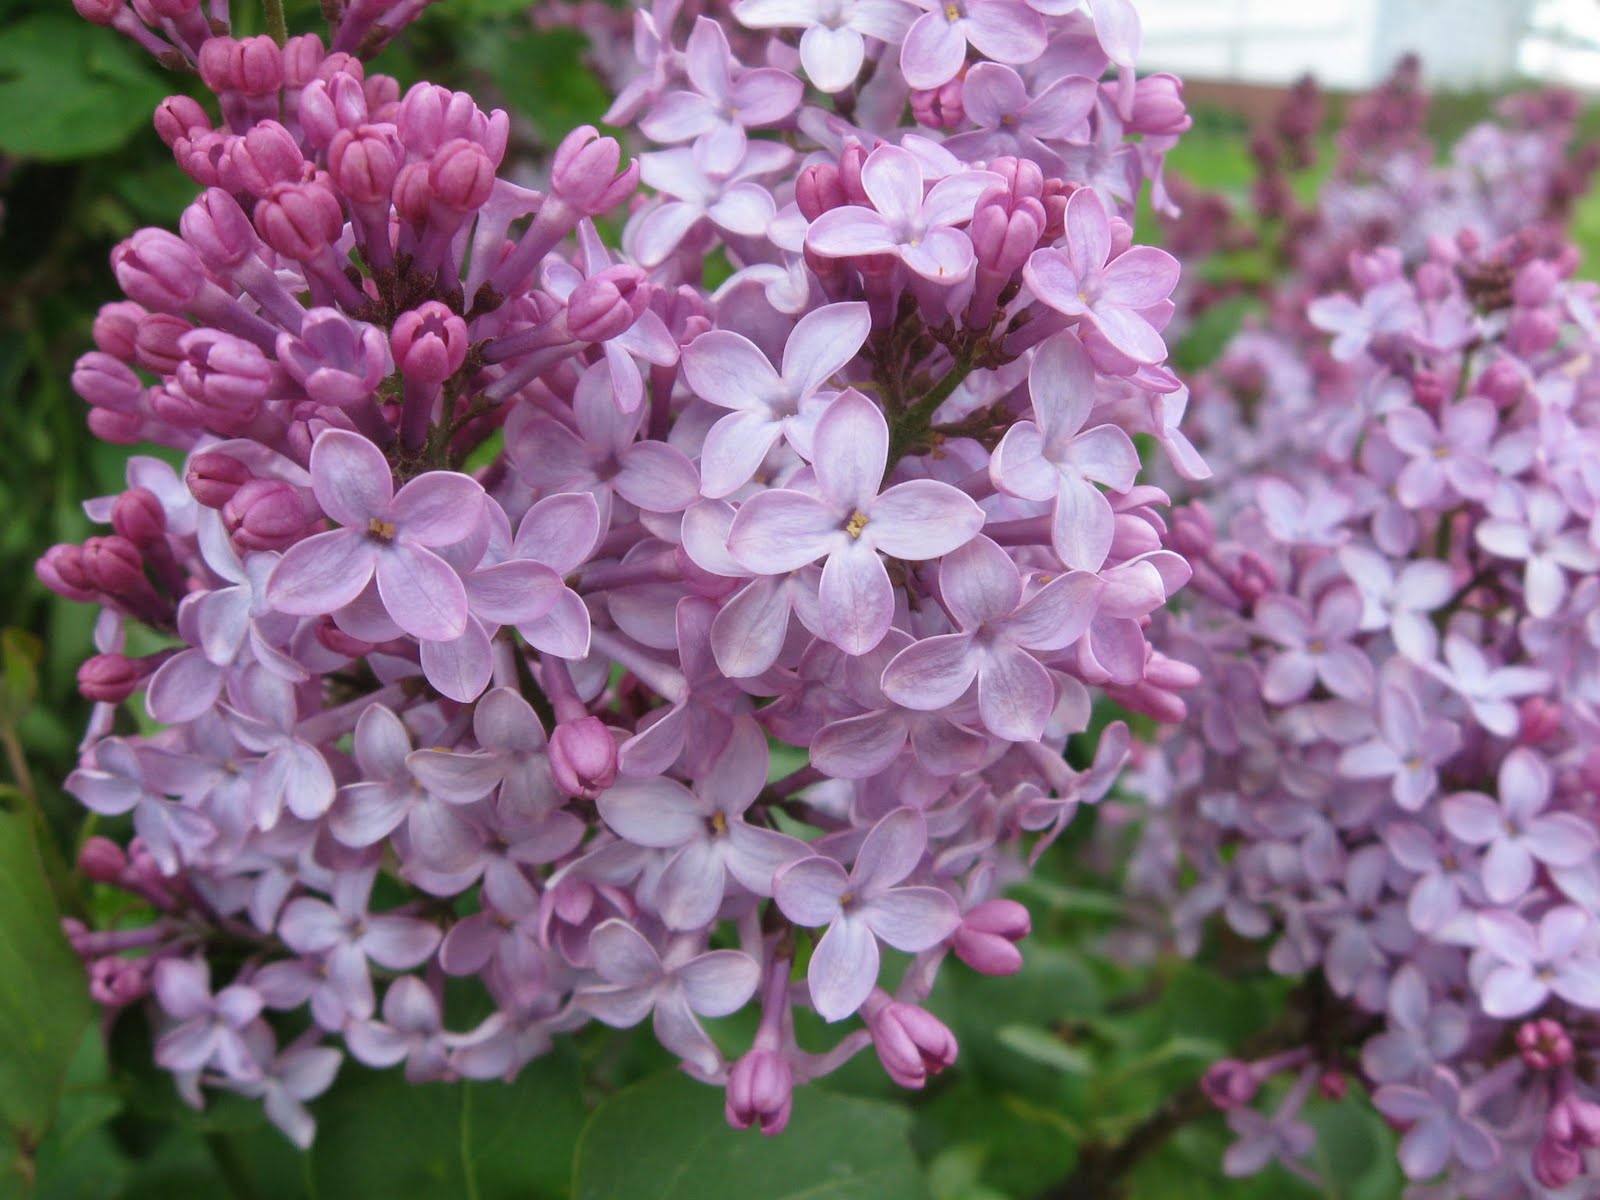 The Lilac